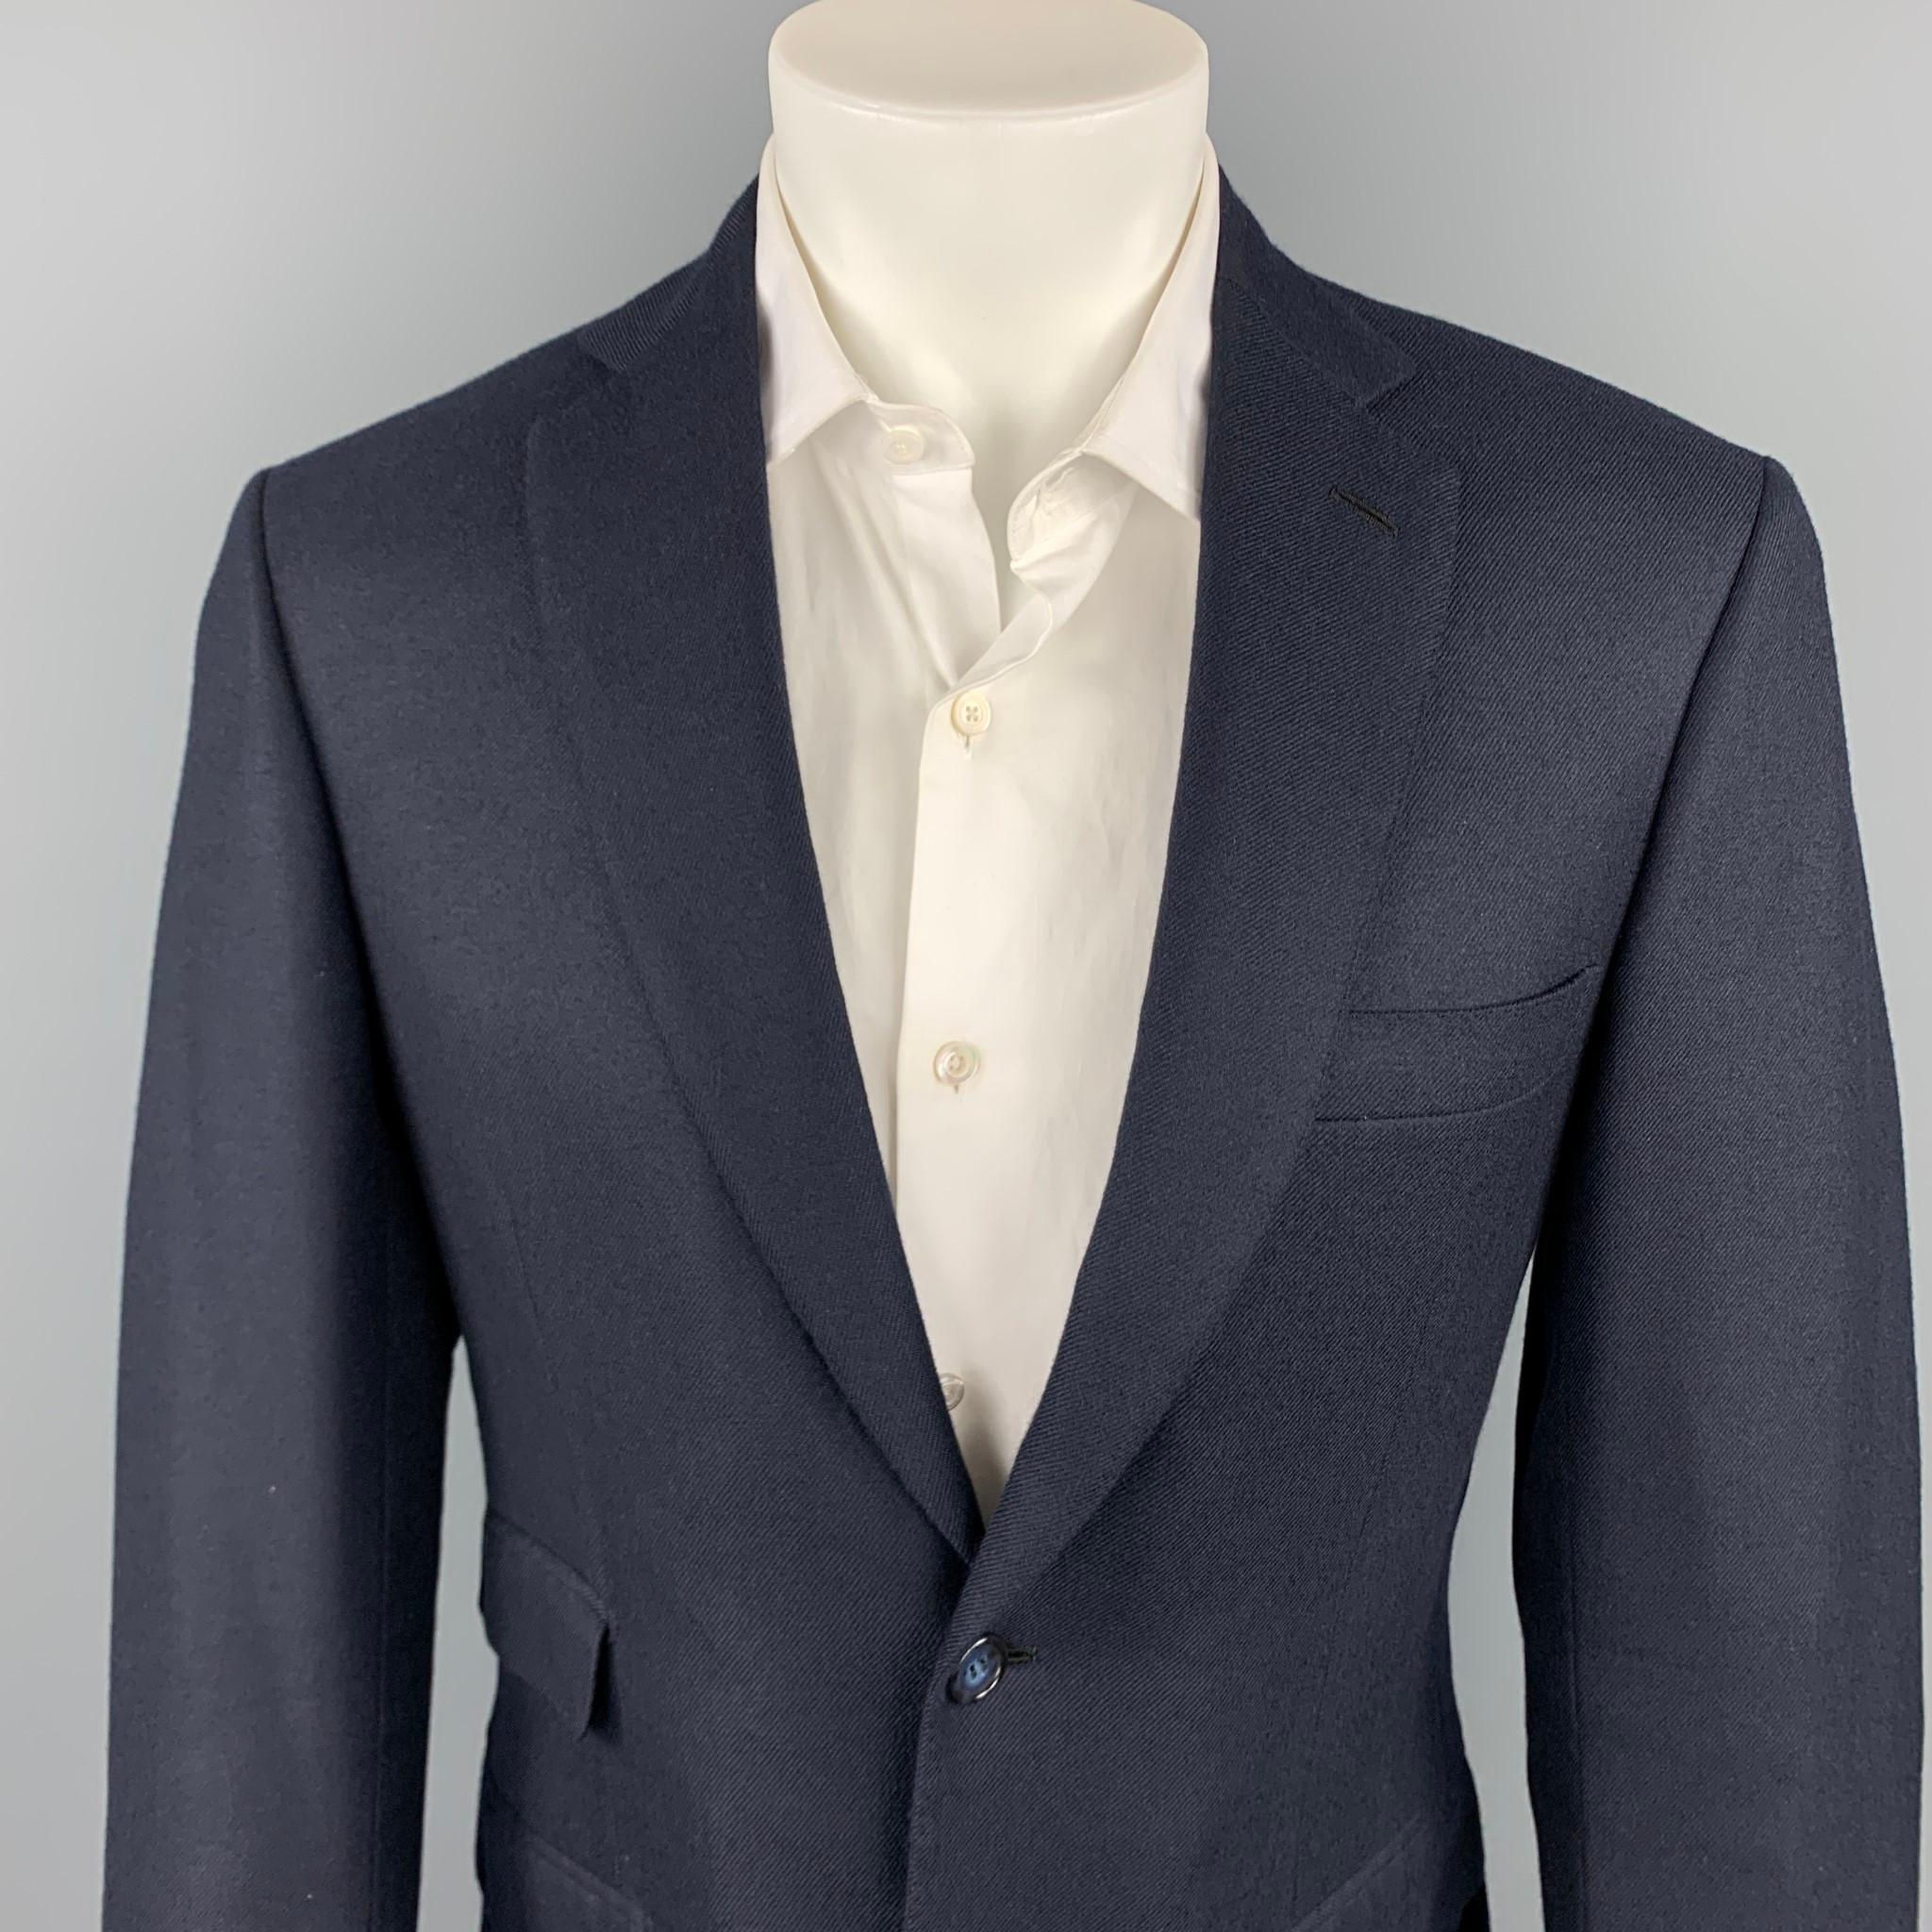 BRIONI custom sport coat comes in a navy cashmere with a full monogram print liner featuring a notch lapel, flap pockets, and a two button closure. Made in Italy.

Very Good Pre-Owned Condition.
Marked: Custom size

Measurements:

Shoulder: 18.5